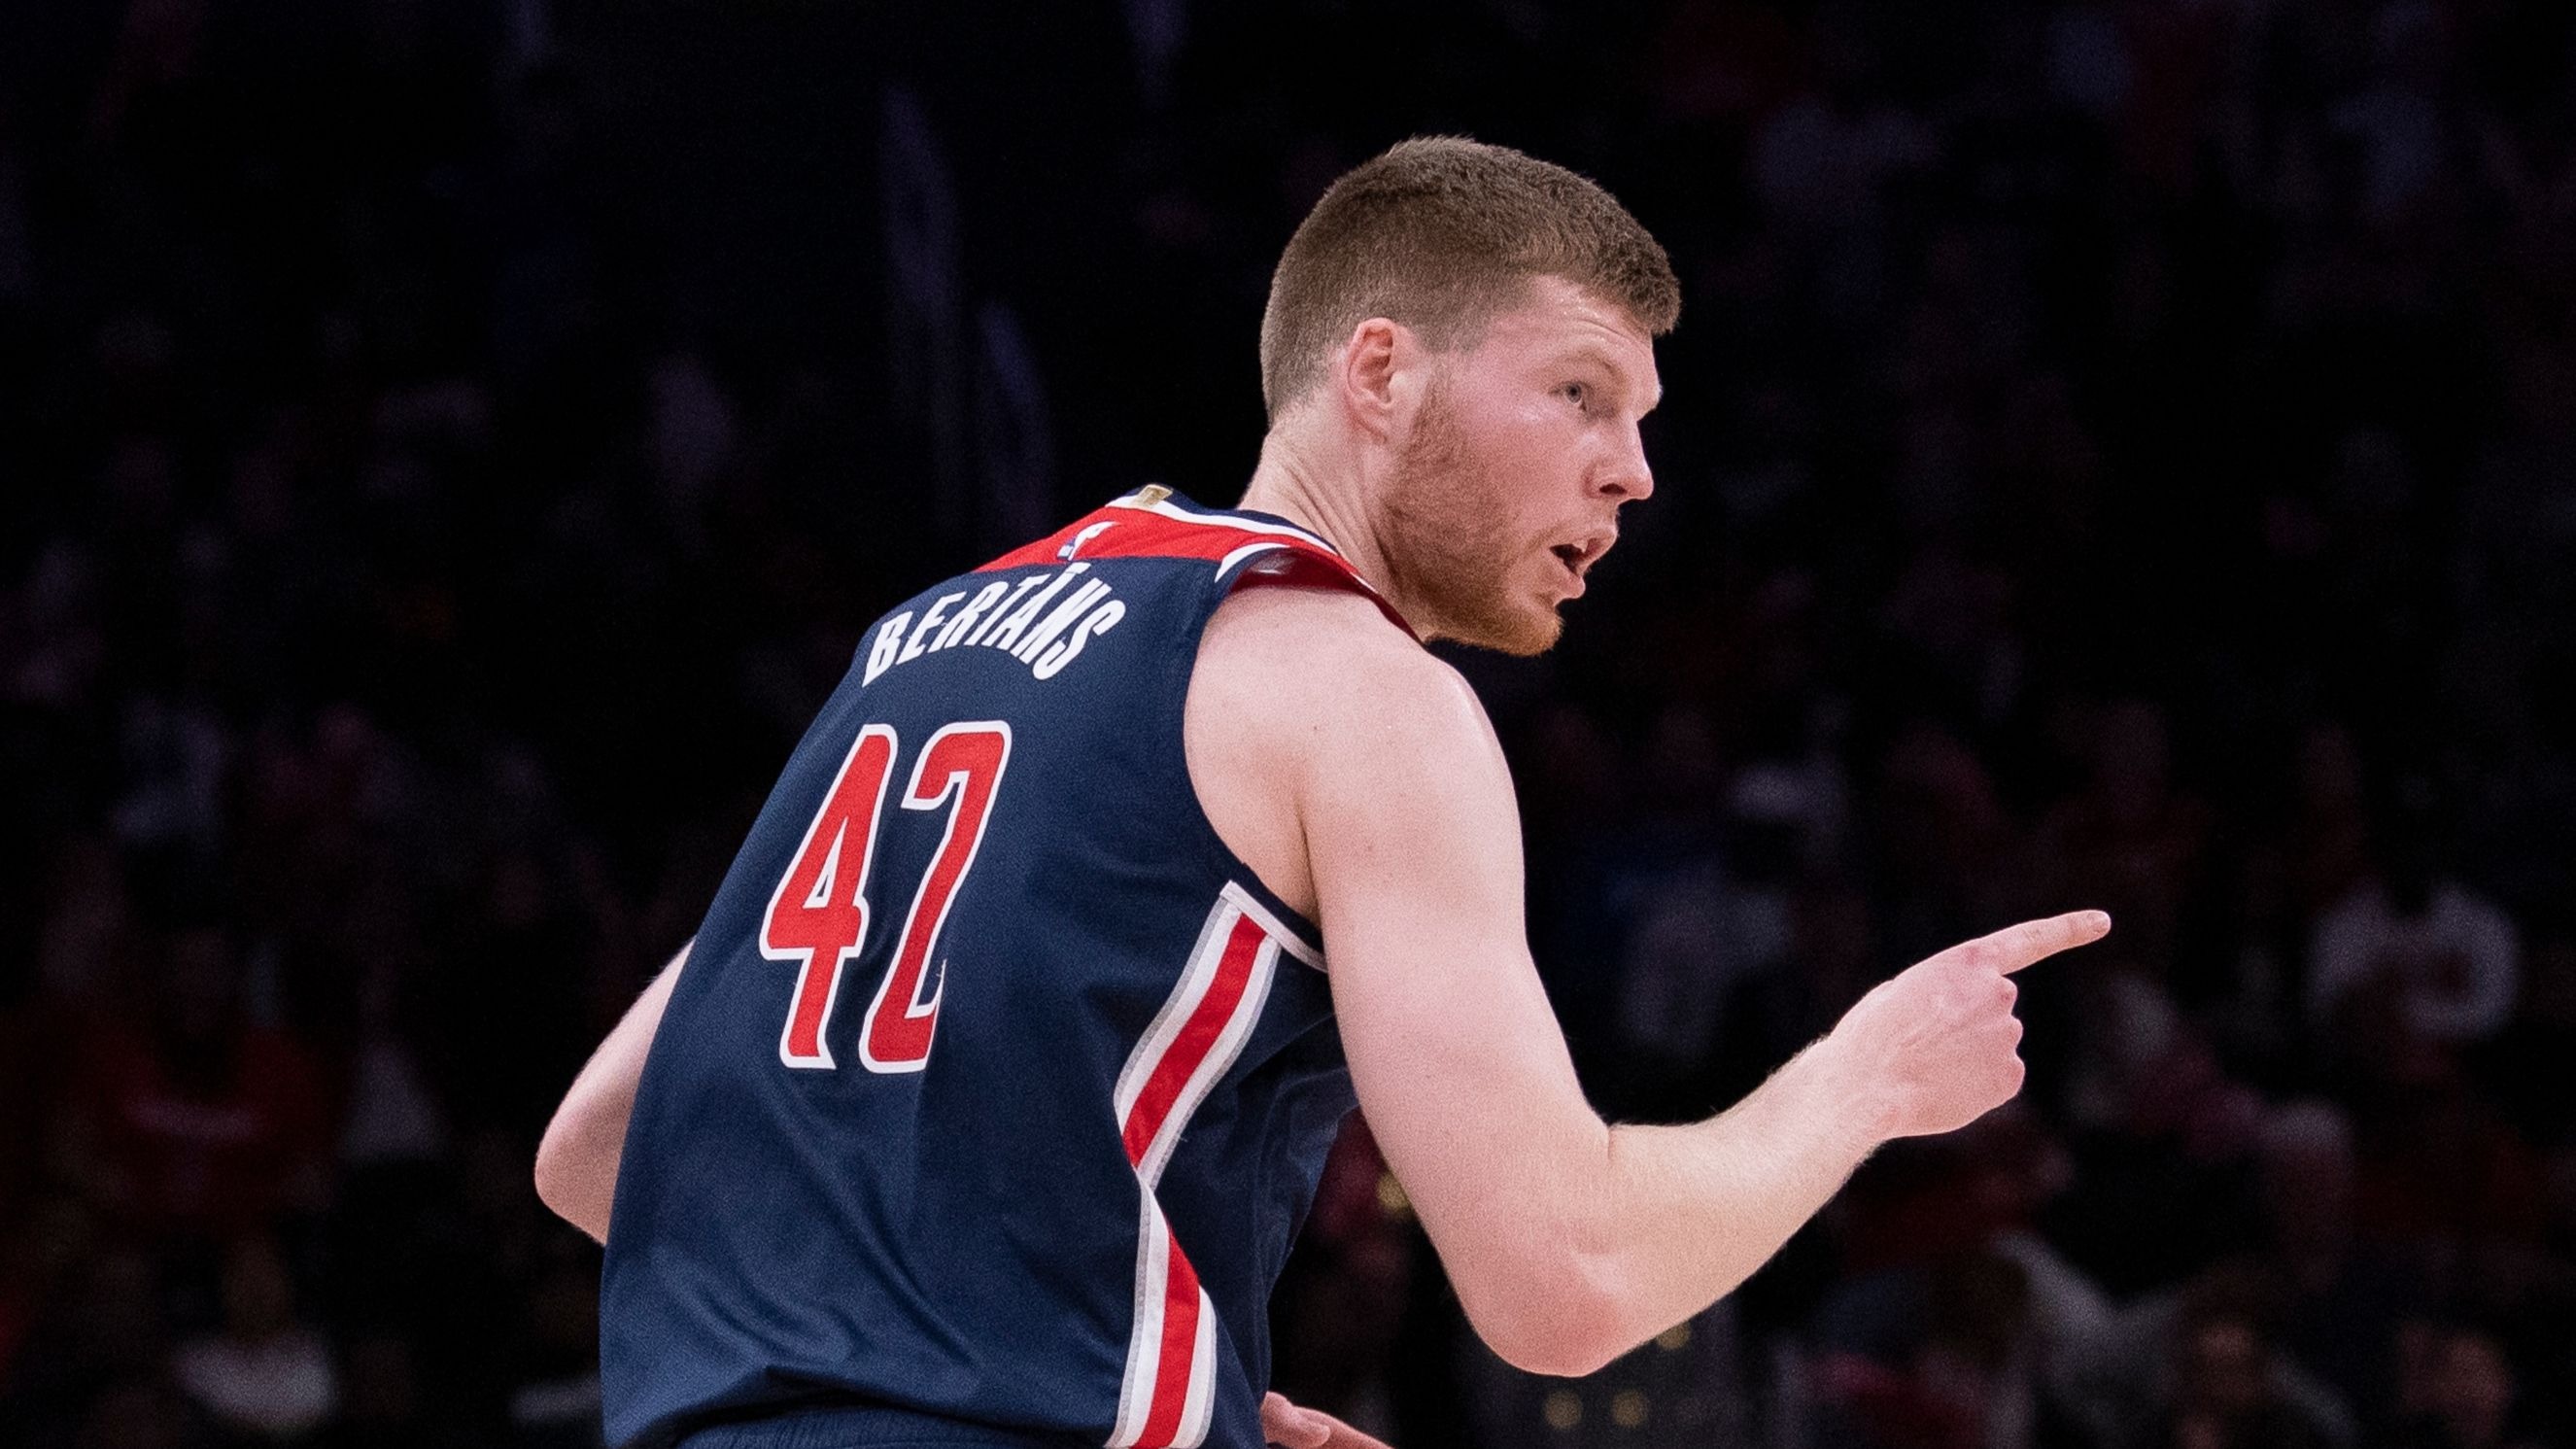 WATCH: Davis Bertans Hits Three Straight 3-Pointers to Put Wizards Up Vs. 76ers